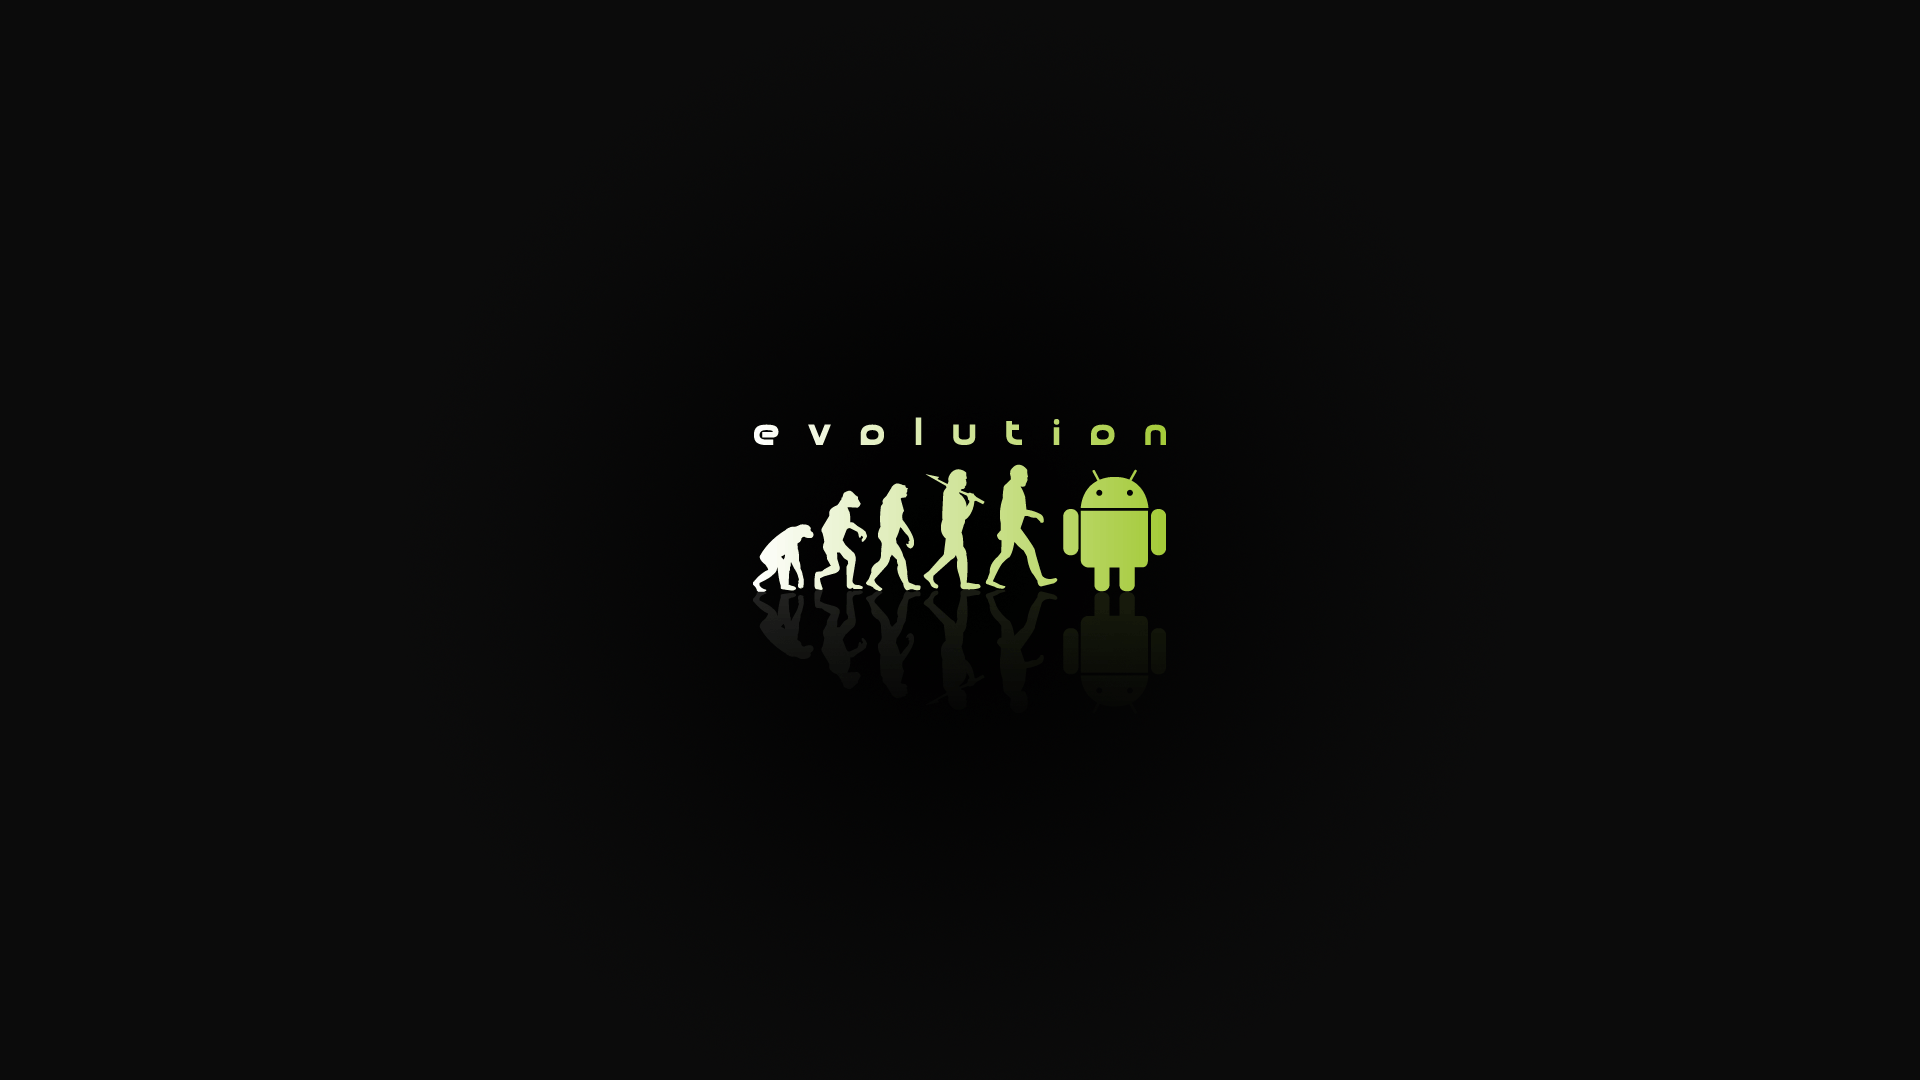 Archive Android Wallpaper. Uffenorde